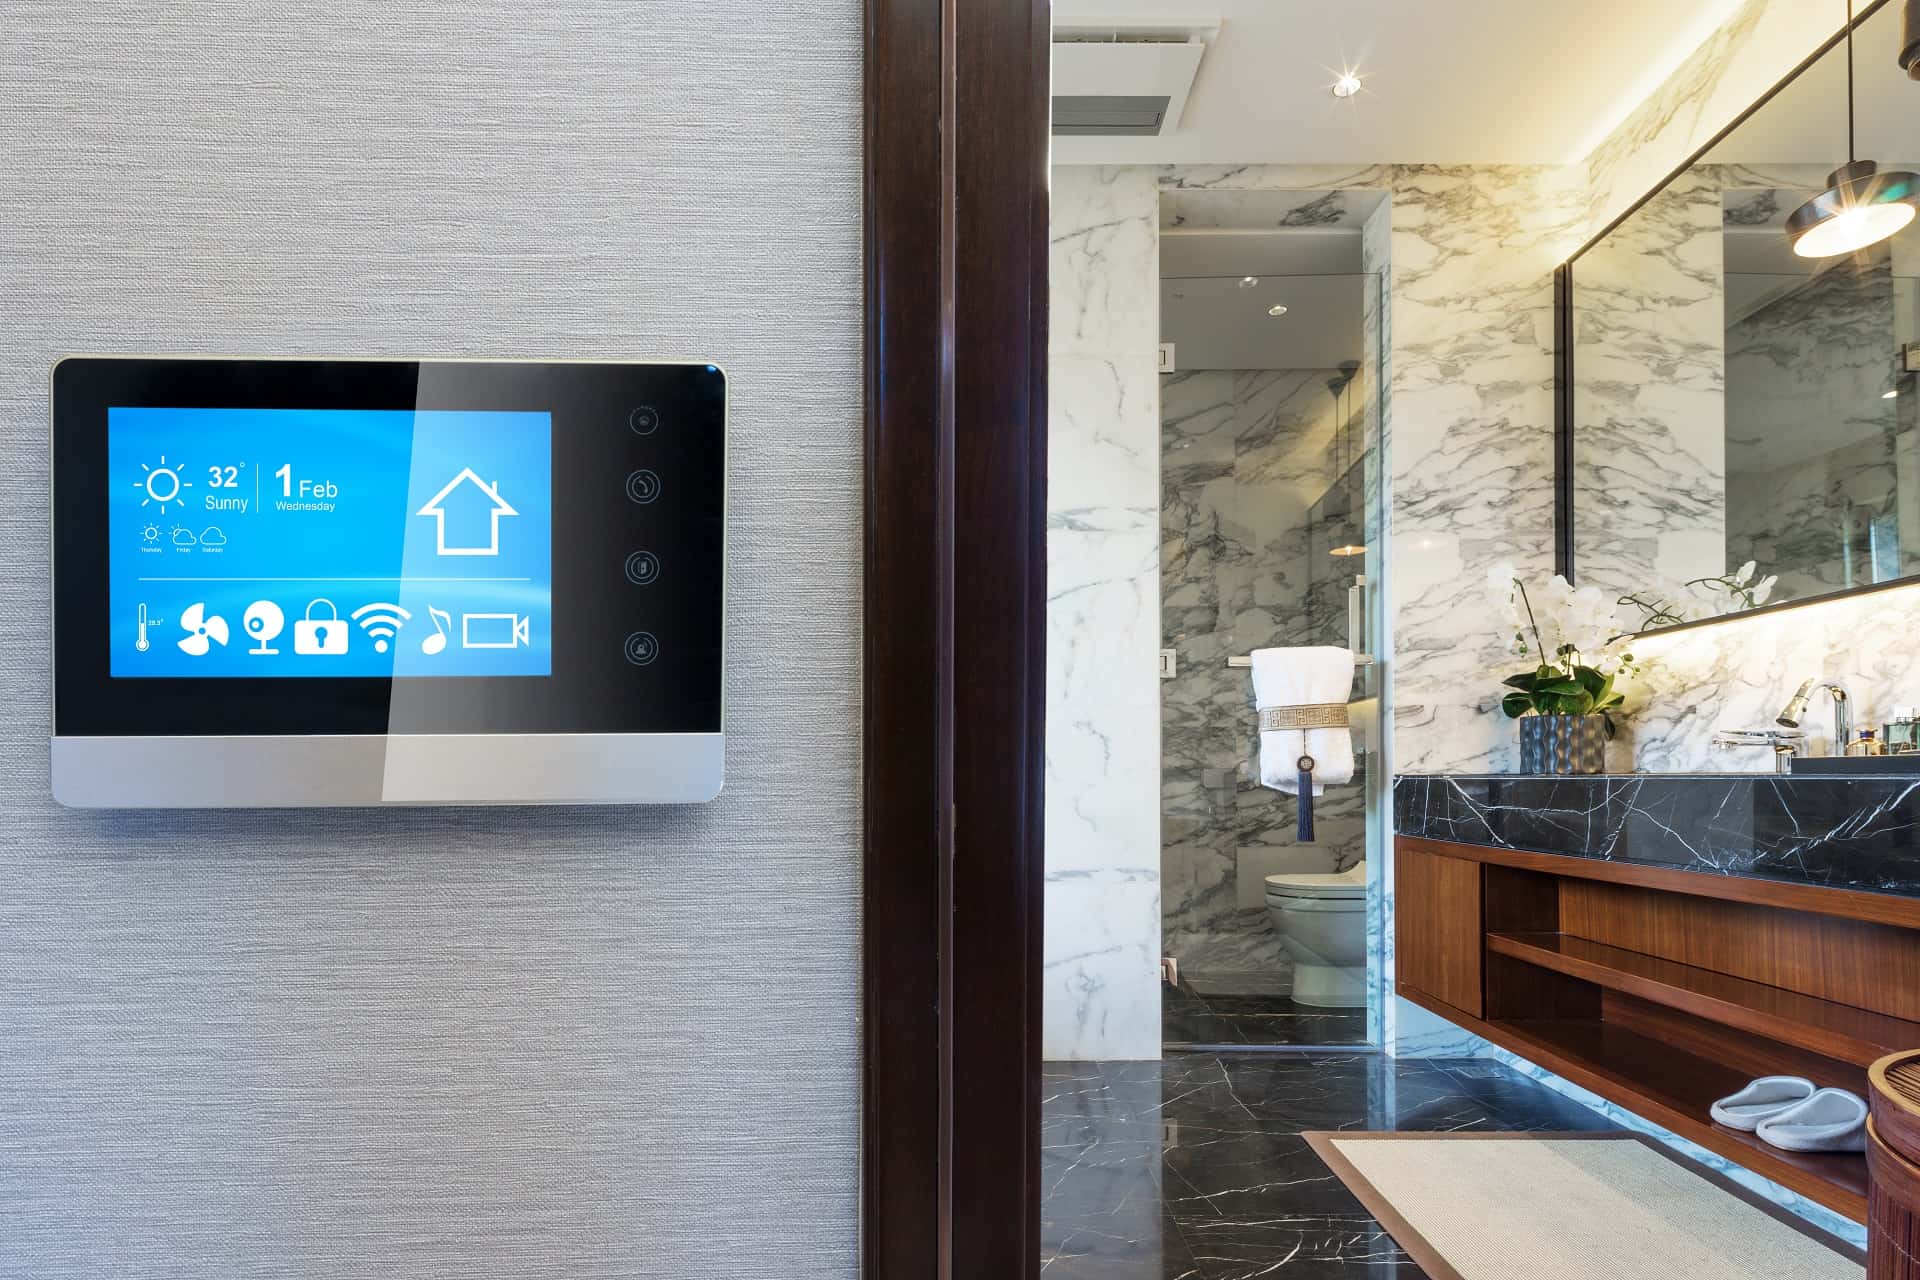 smart screen with smart home and modern bathroom